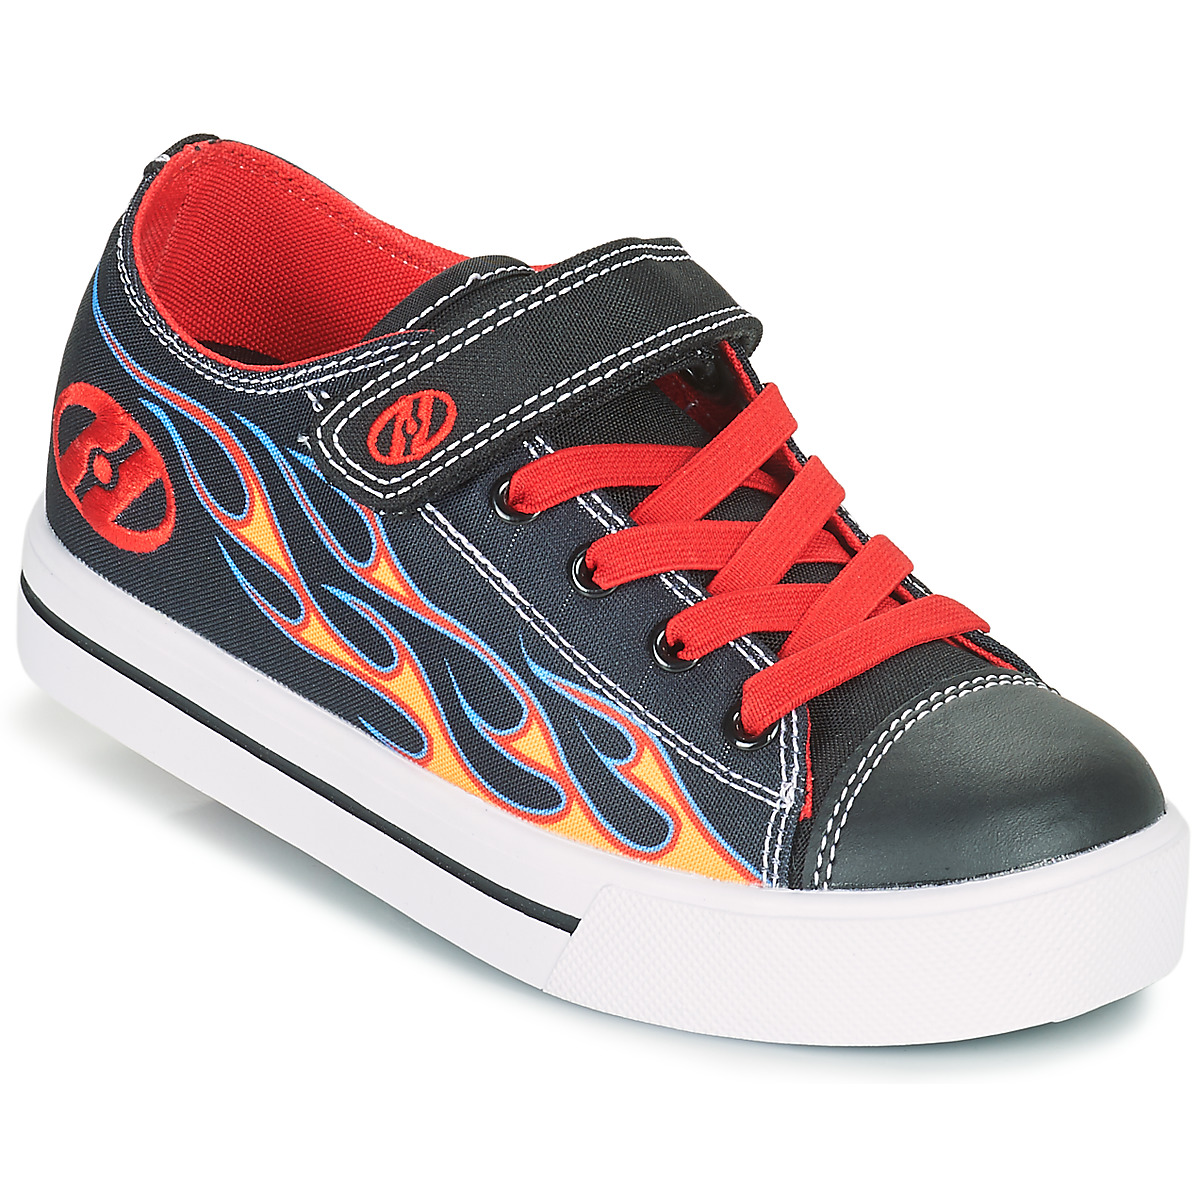 Roller shoes Heelys Snazzy X2 Ύφασμα